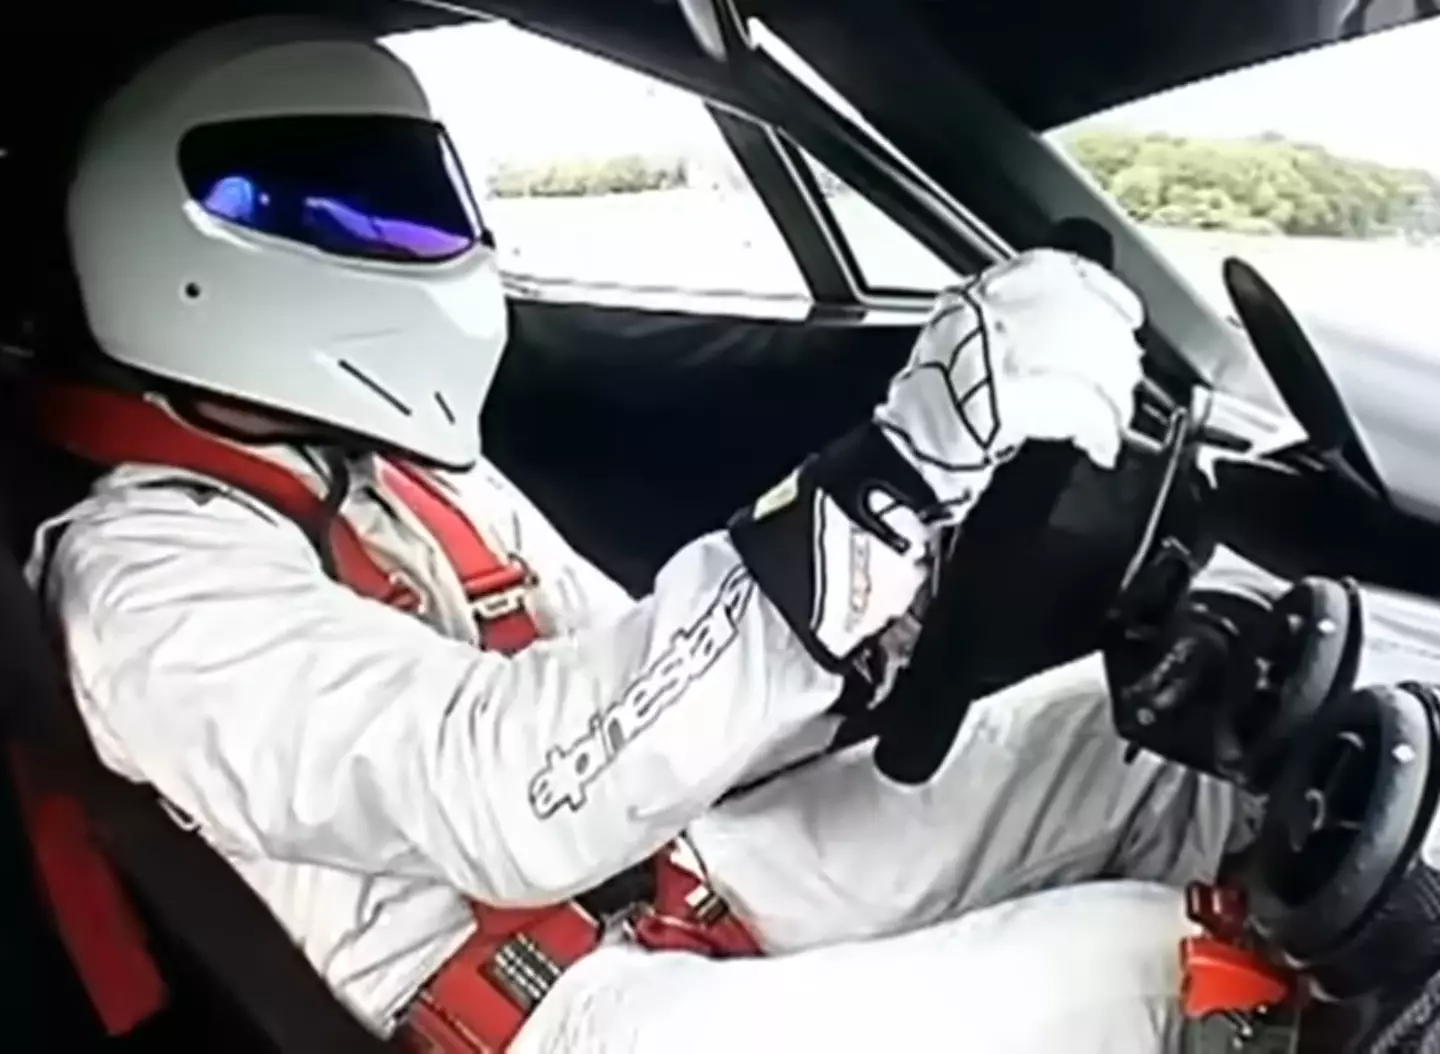 'The Stig' behind the wheel of the Ferrari FXX, and Perry McCarthy knew right away it wasn't Top Gear's regular Stig driving.